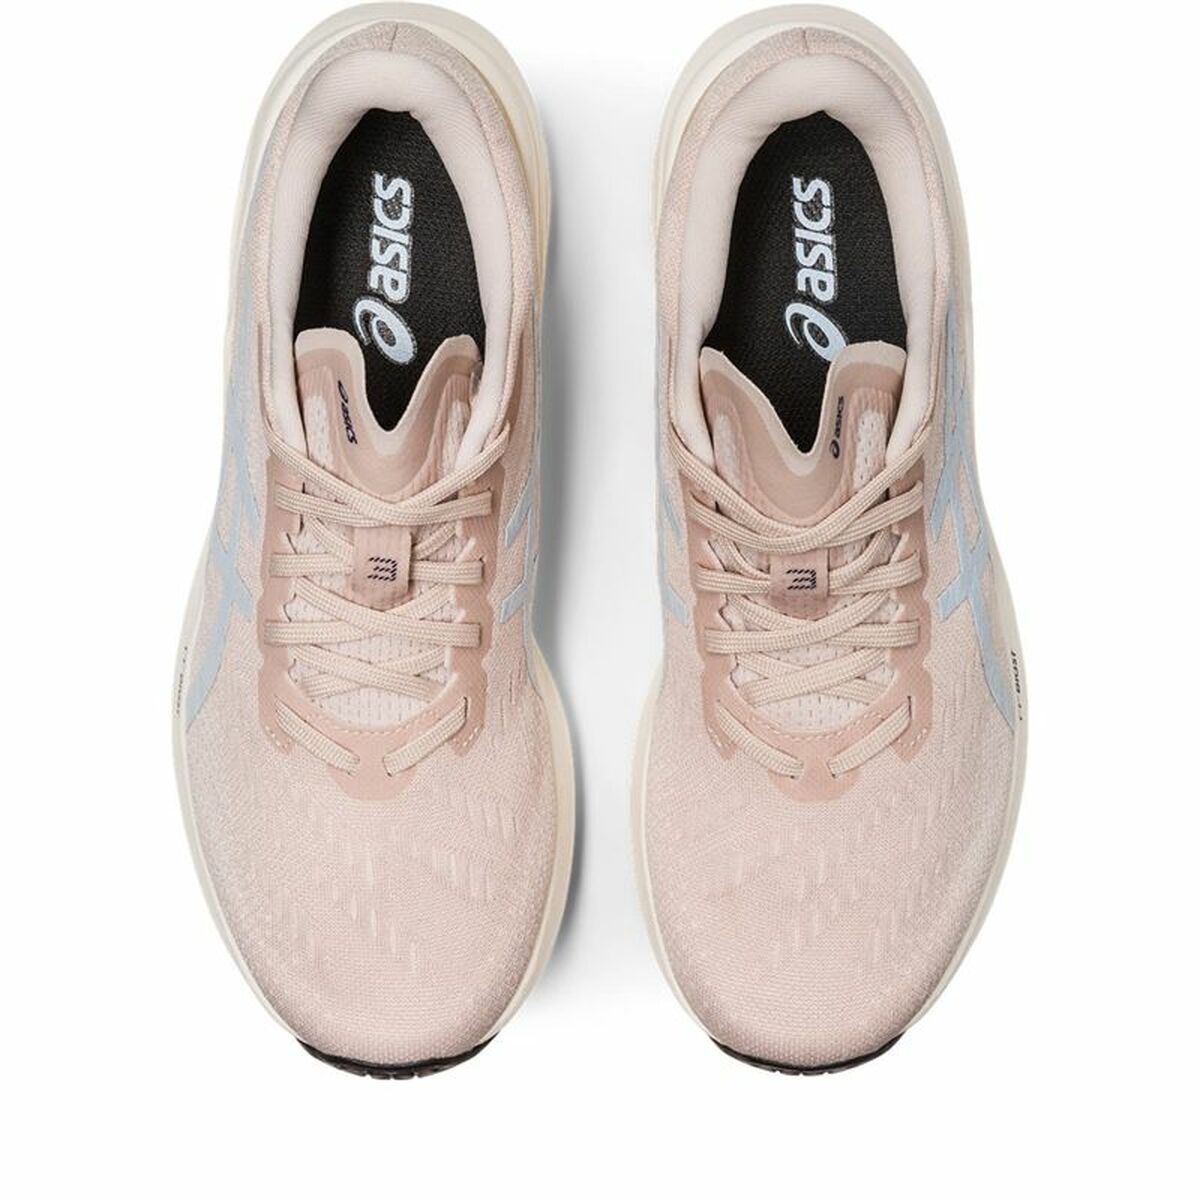 Running Shoes for Adults Asics Dynablast 3 Lady Beige